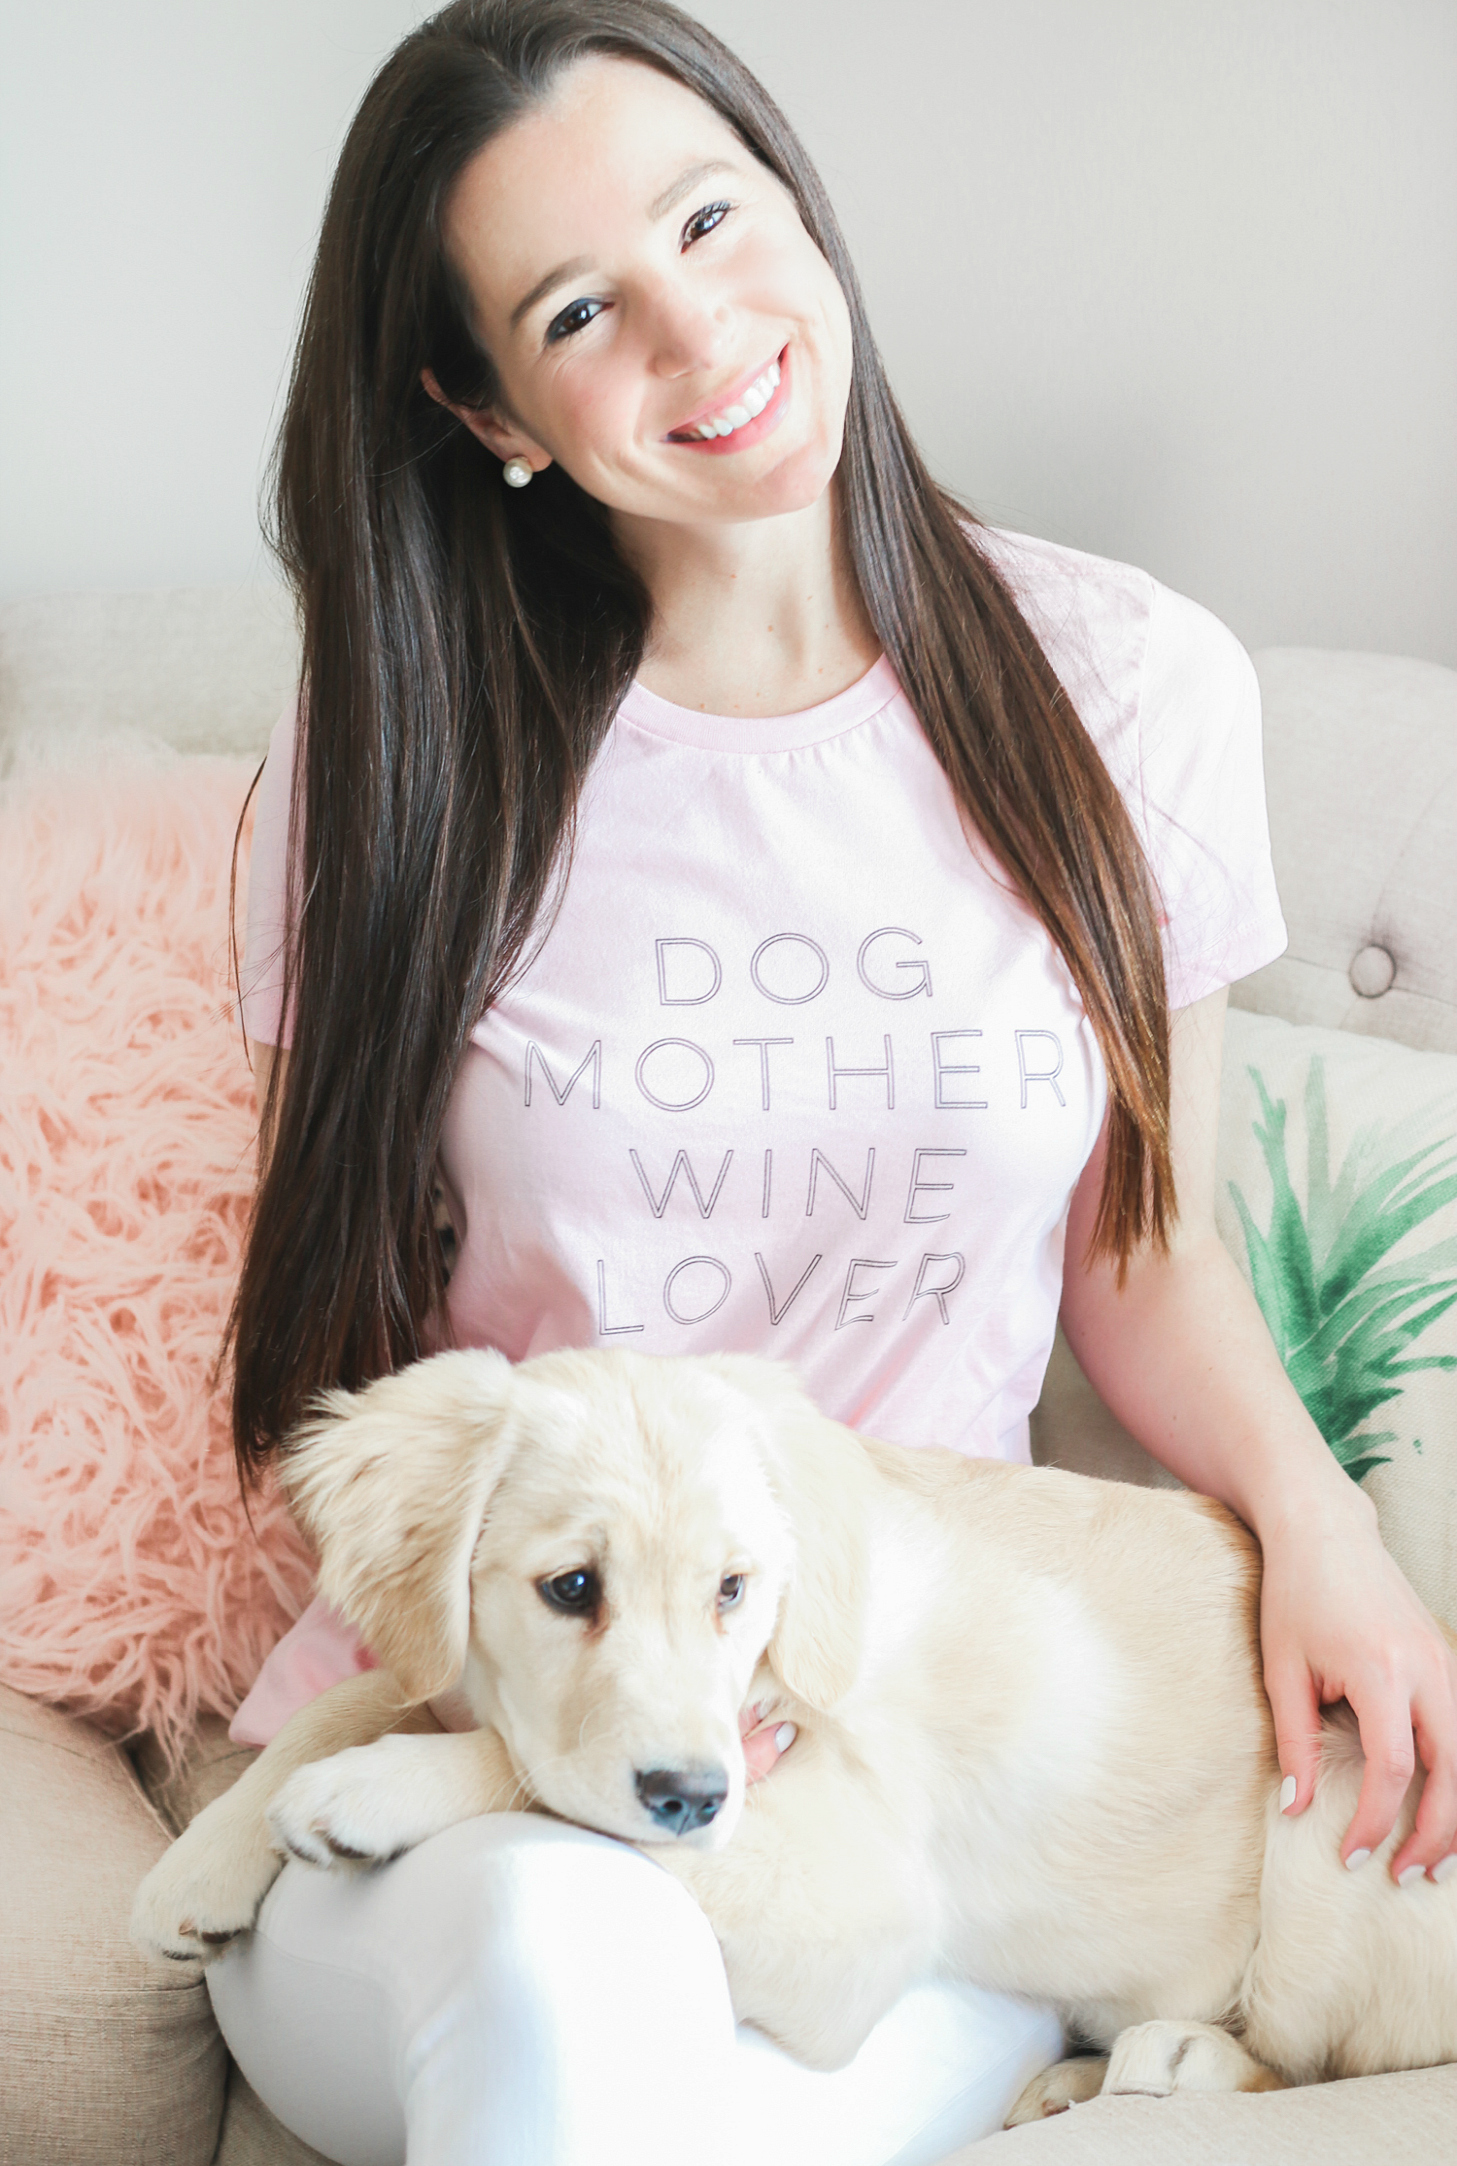 Pink Dog Mother Wine Lover shirt, Woman's Best Friend: 8 Reasons to Get a Puppy by southern lifestyle blogger Stephanie Ziajka from Diary of a Debutante, how a new golden retriever puppy can help if you're depressed in a new city, 8 reasons to get a puppy, 8 reasons why you should get a dog, 4 month old golden retriever puppy pictures